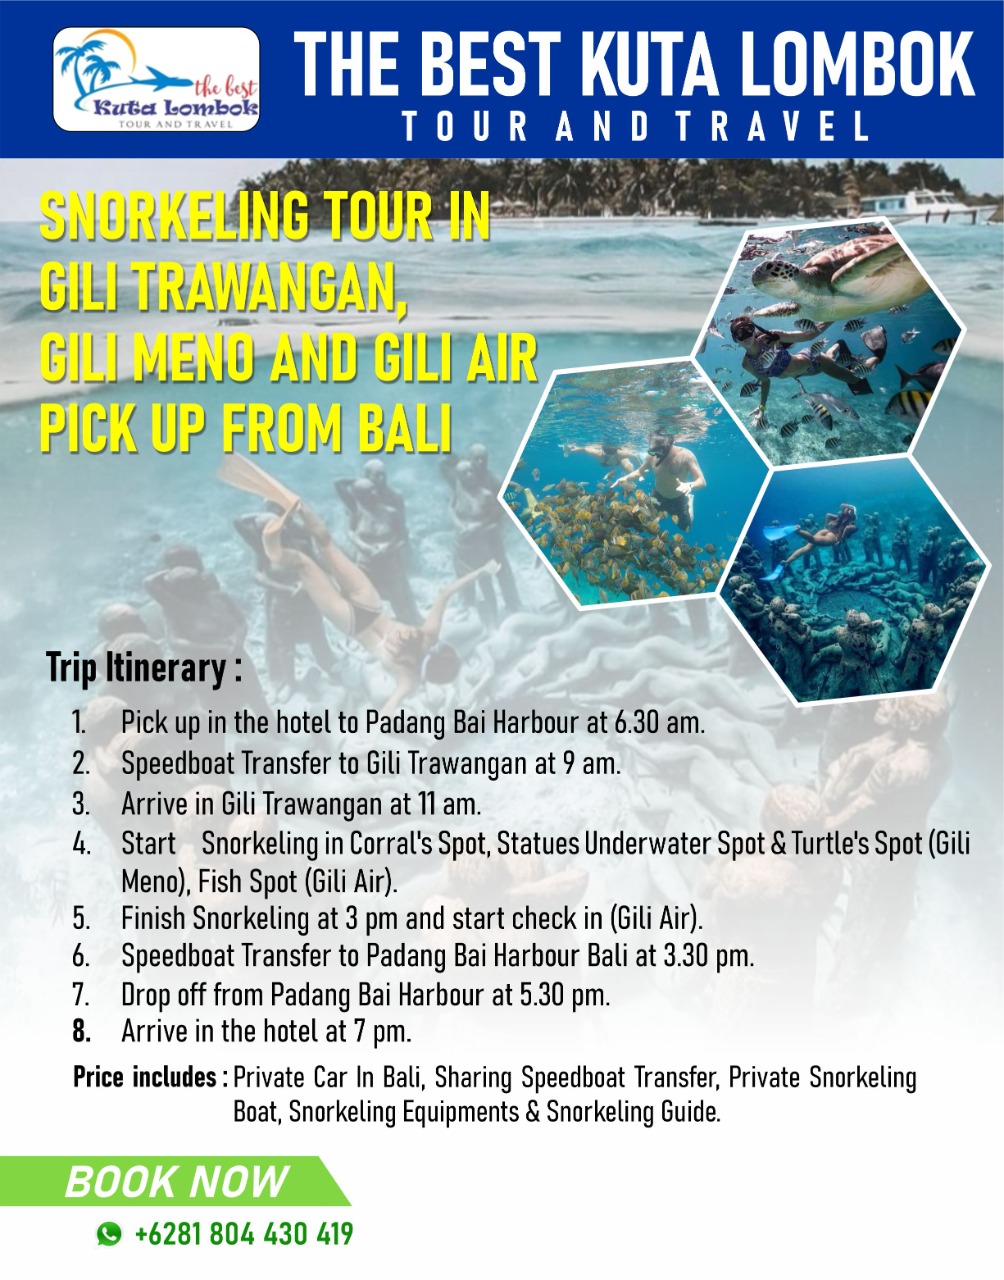 SNORKELING TOUR IN GILI ISLANDS PICK UP FROM BALI